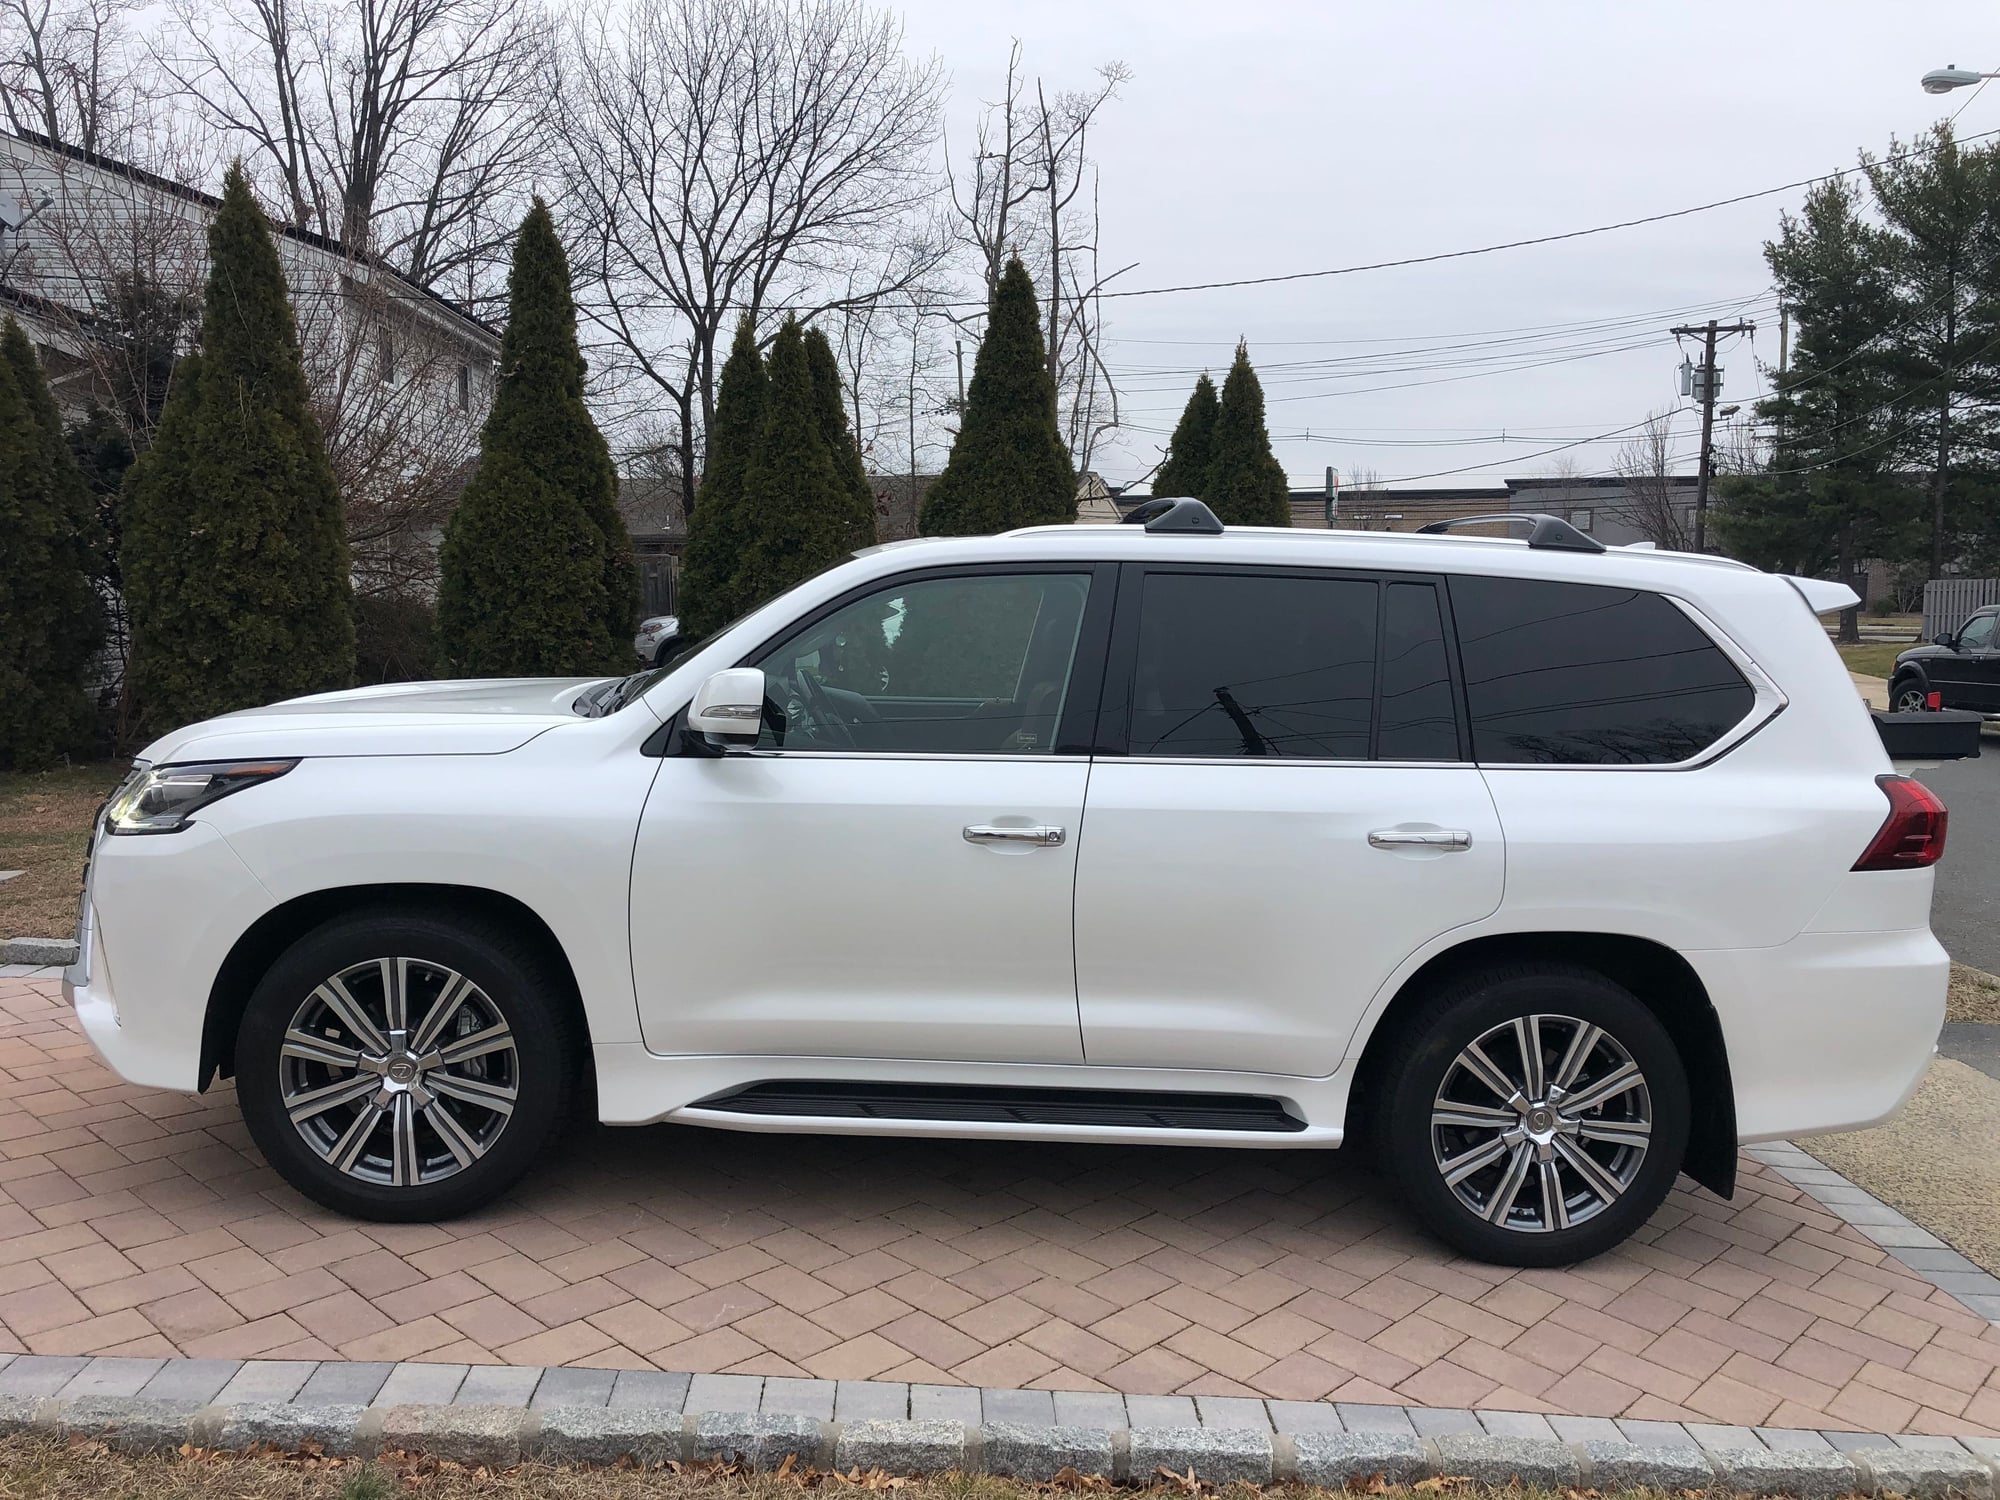 2017 Lexus LX570 - 2017 LX570 White with Cabernet, $99xxx MSRP ONLY 9700 miles - Used - VIN JTJHY7AX1H4240479 - 9,664 Miles - 8 cyl - AWD - Automatic - SUV - White - Edison, NJ 08817, United States